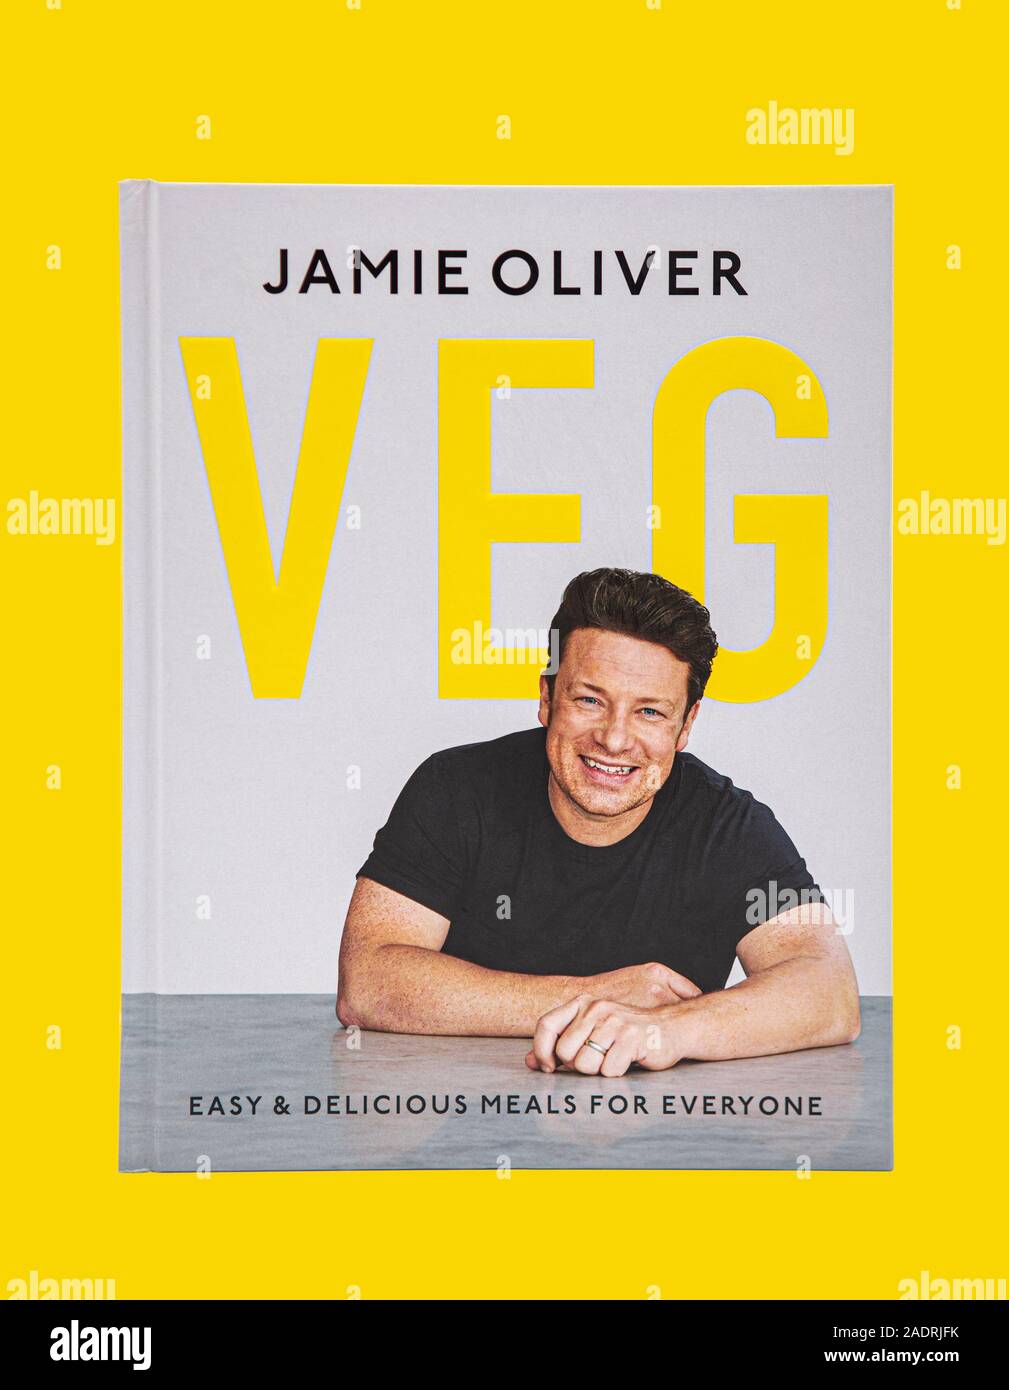 SWINDON, UK - NOVEMBER 25, 2019: Jamie Oliver Veg Cook Book, Easy and Delicious Meals for everyone on a yellow background. Stock Photo